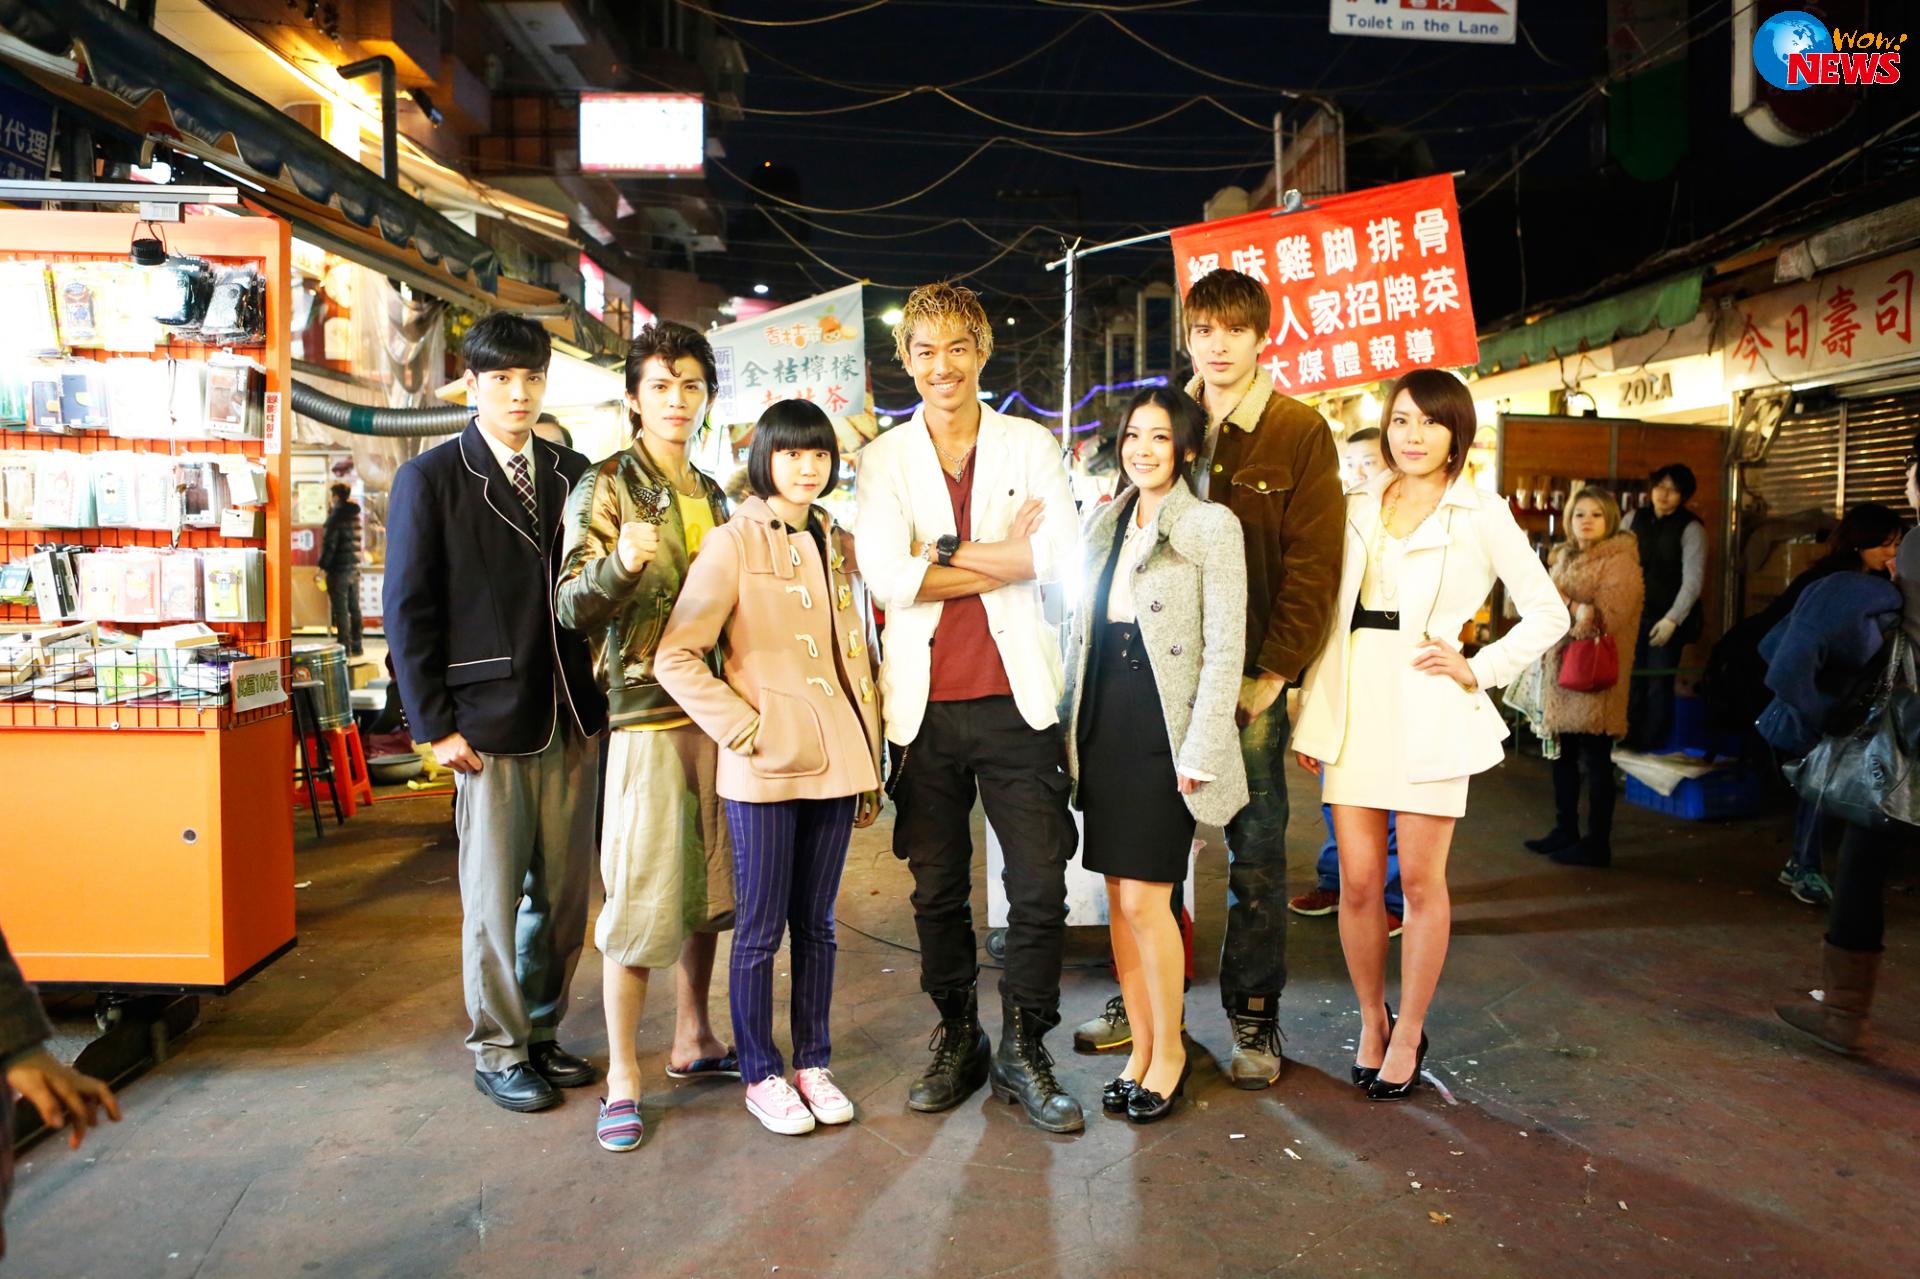 Review: GTO Taiwan and GTO 2014 (Live Action Drama | Aurabolt's Anime